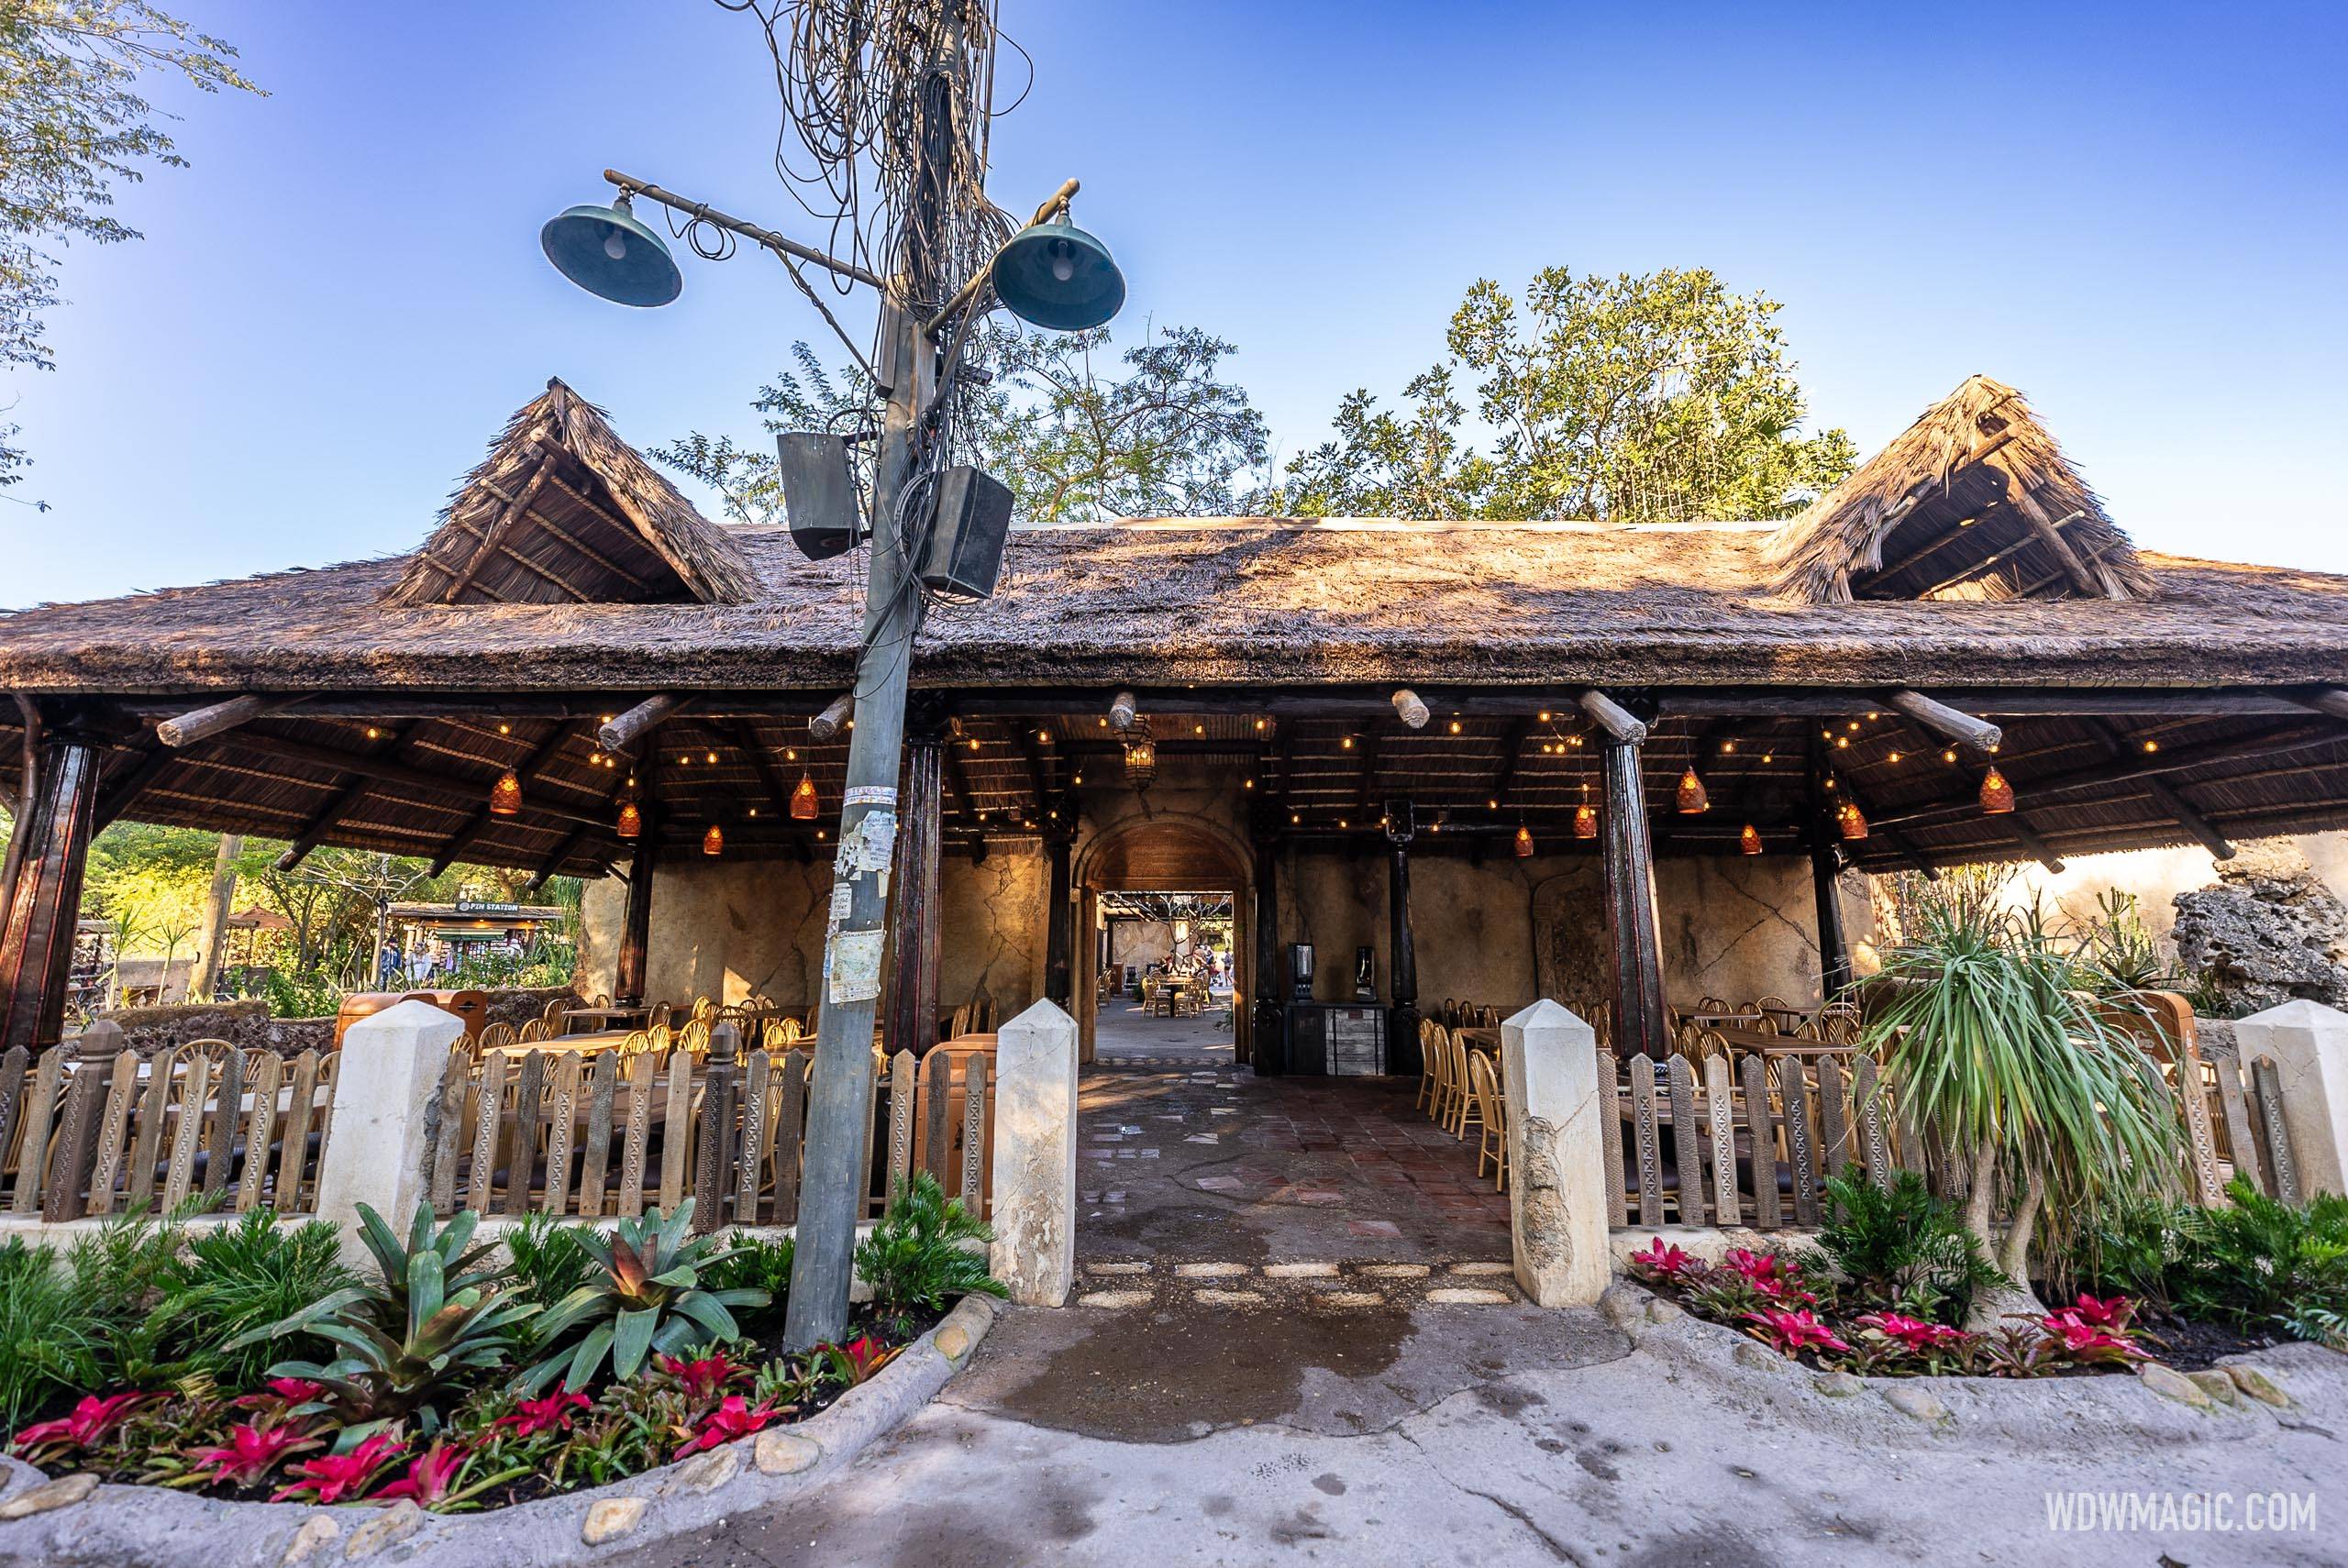 New dining space opens for more seating at Harambe Market and Tamu Tamu in Disney's Animal Kingdom